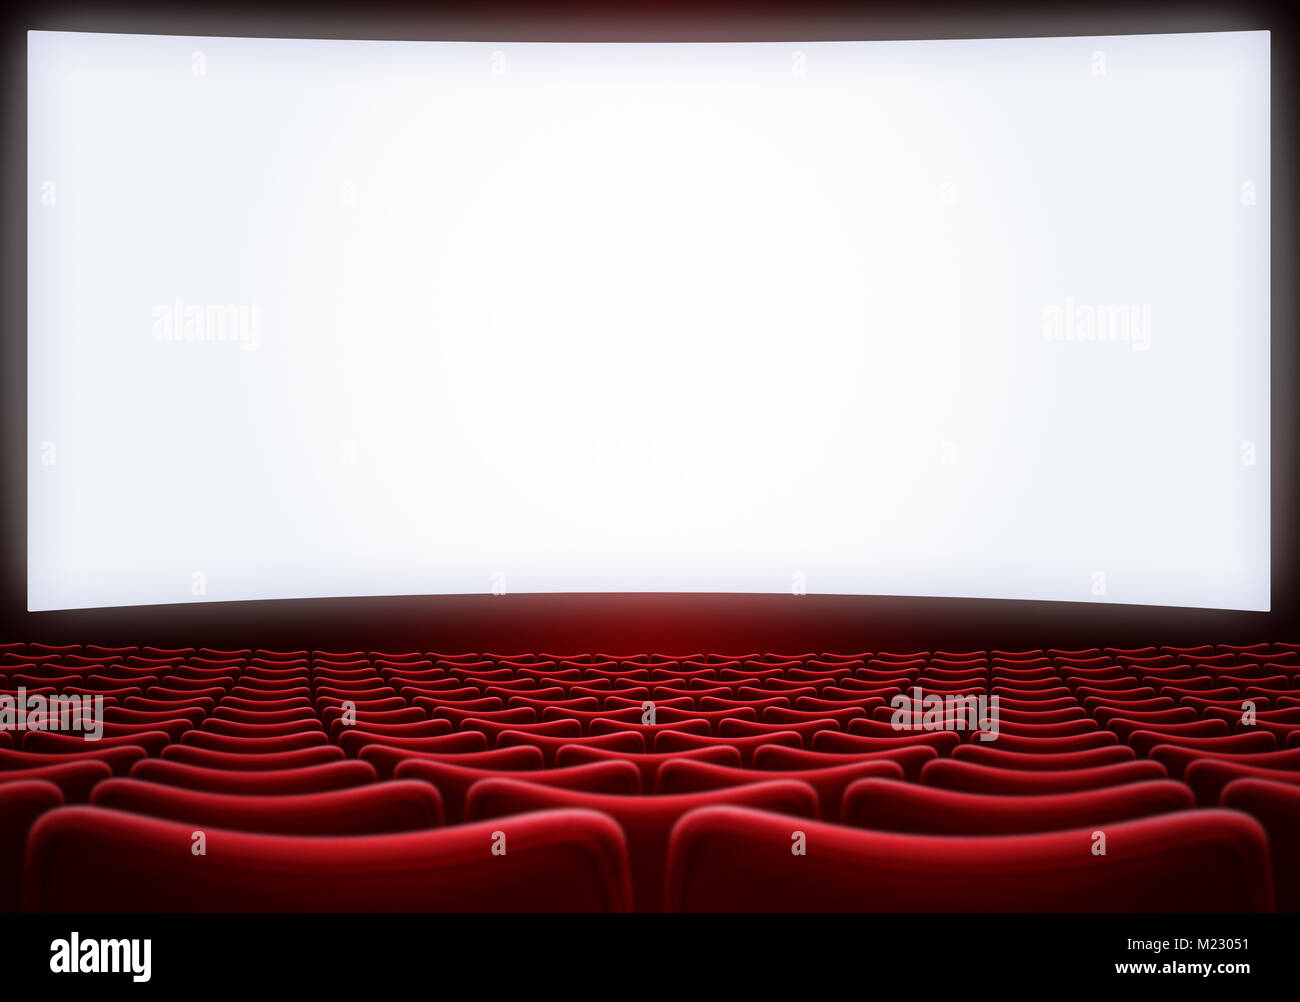 movie theater screen with red seats backgound 3d illustration Stock Photo